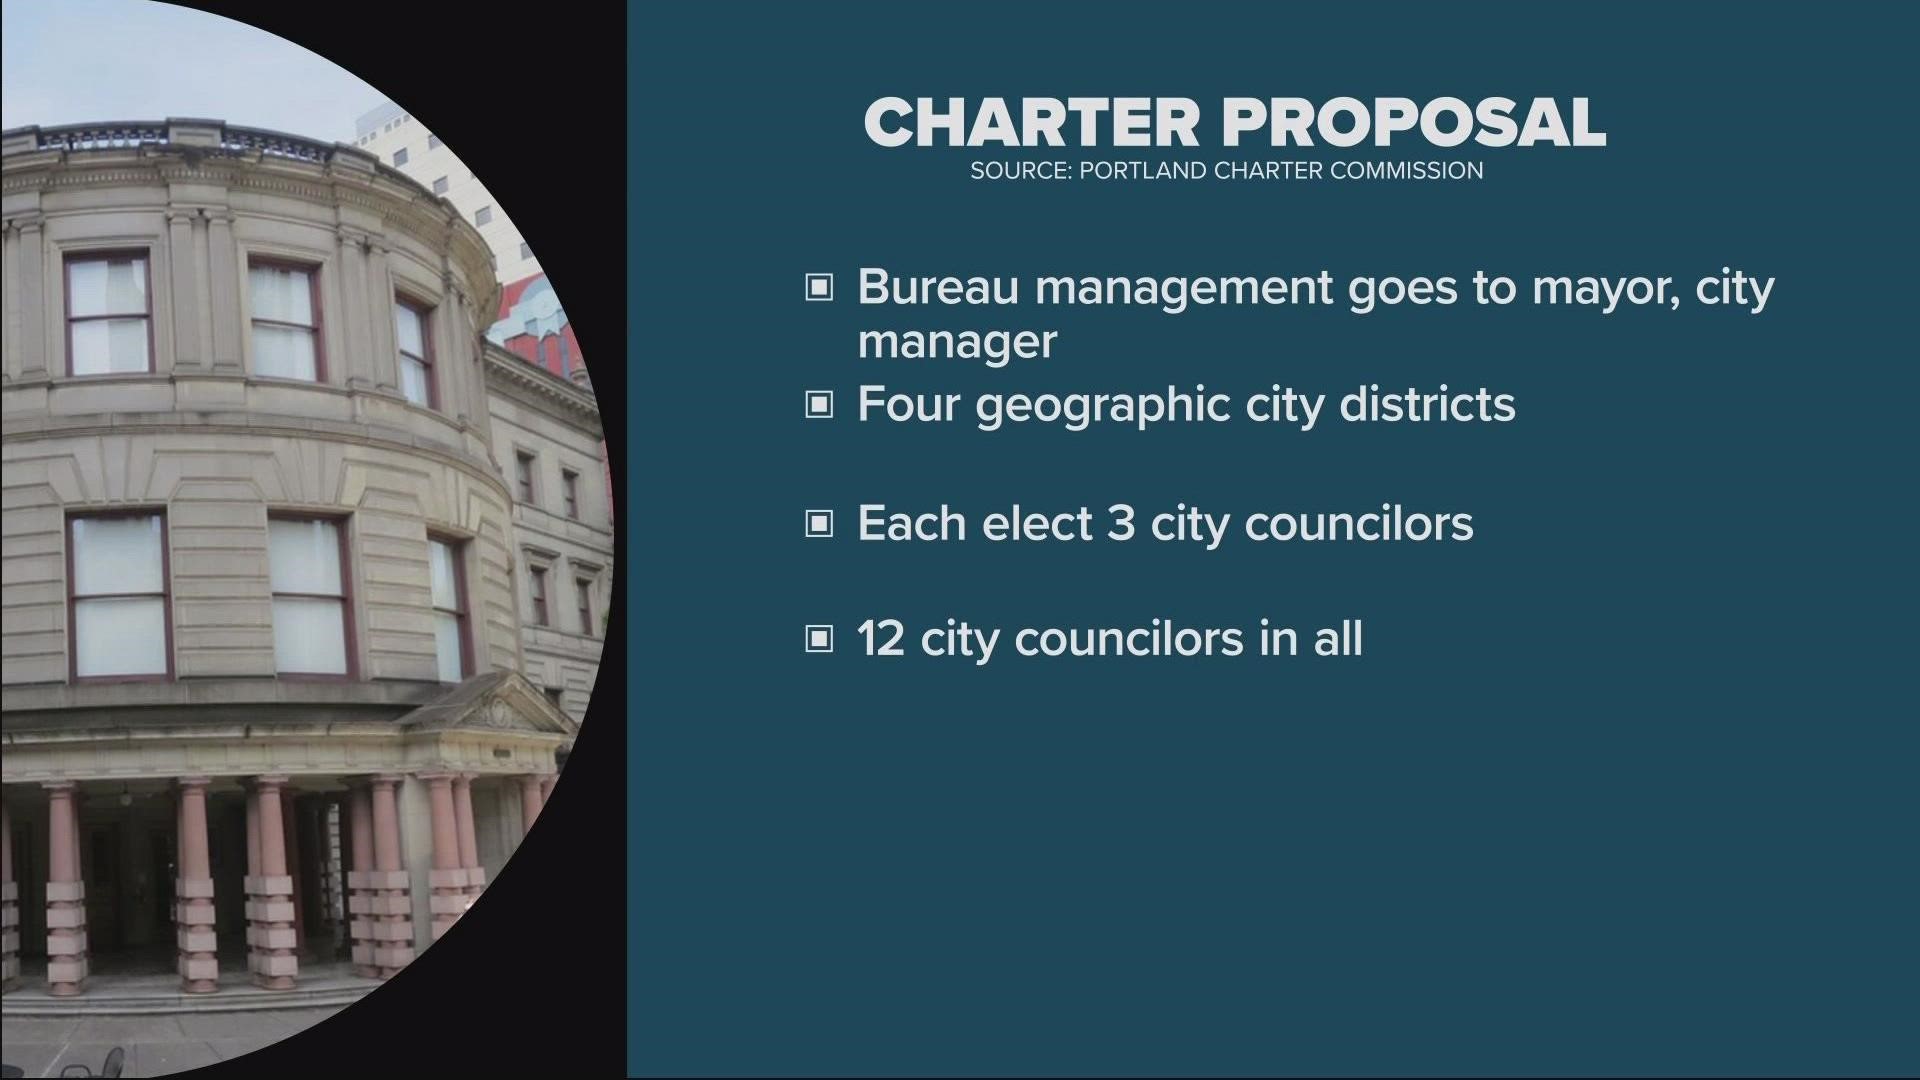 The preliminary agreement allows ranked choice voting, expands the city council to 12 members and removes bureau duties from the city council.